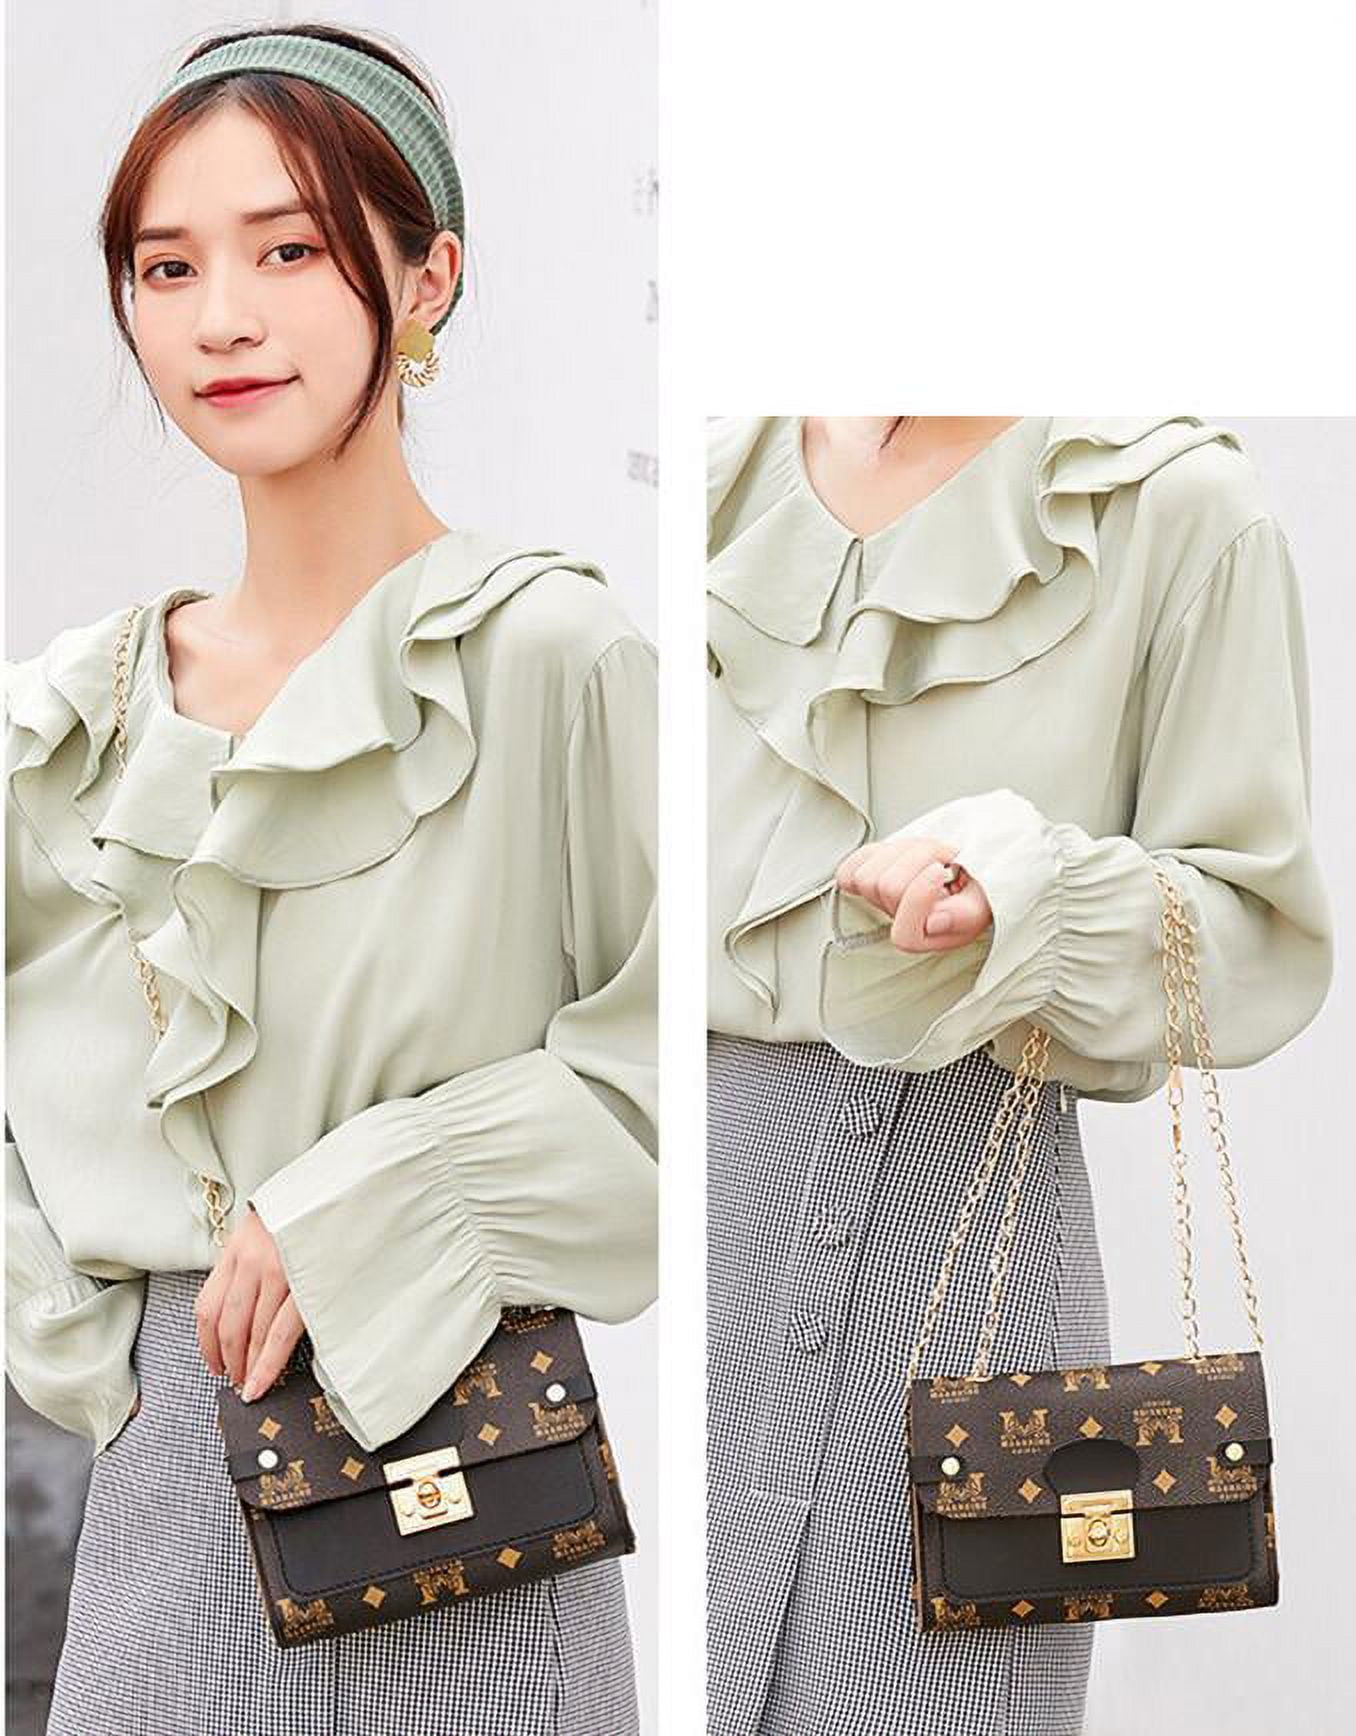 Tabby Designer Tabby Shoulder Bag Mini, Delicate, And Cute Fashion For  Beach Shopping, Travel, Or Luxury Pure Color, Small Size, Smooth Leather  Letter E23 From Lulubag88, $41.46 | DHgate.Com